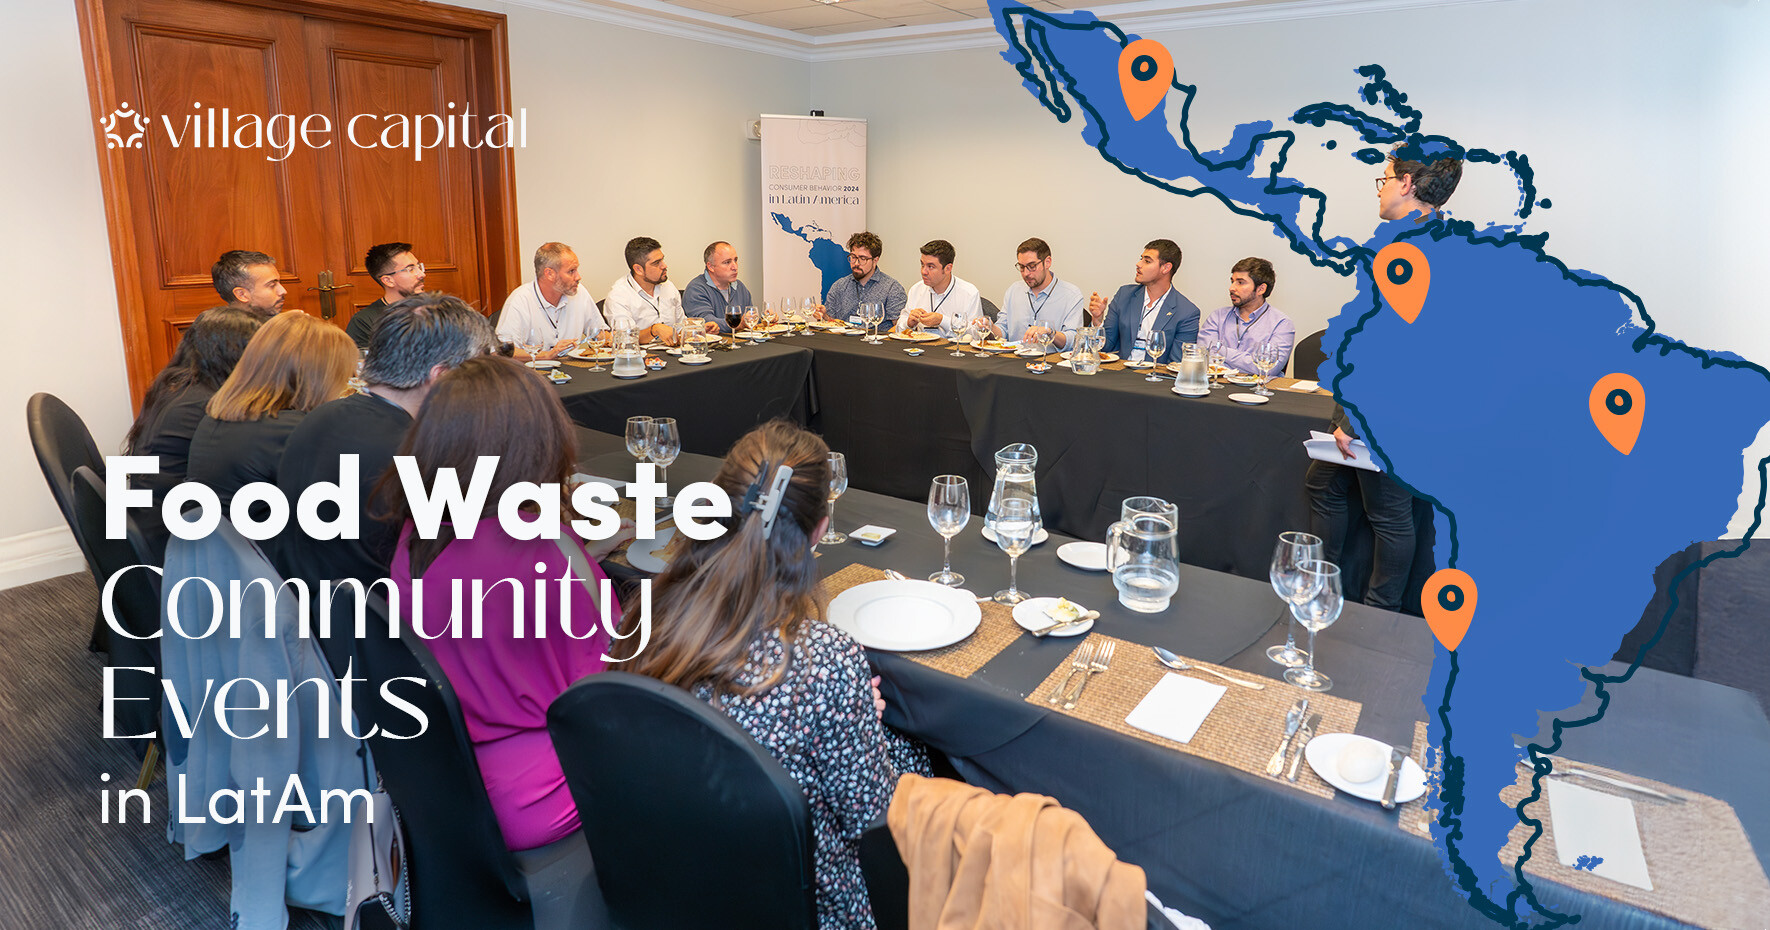 Village Capital food waste community events in Latin America 